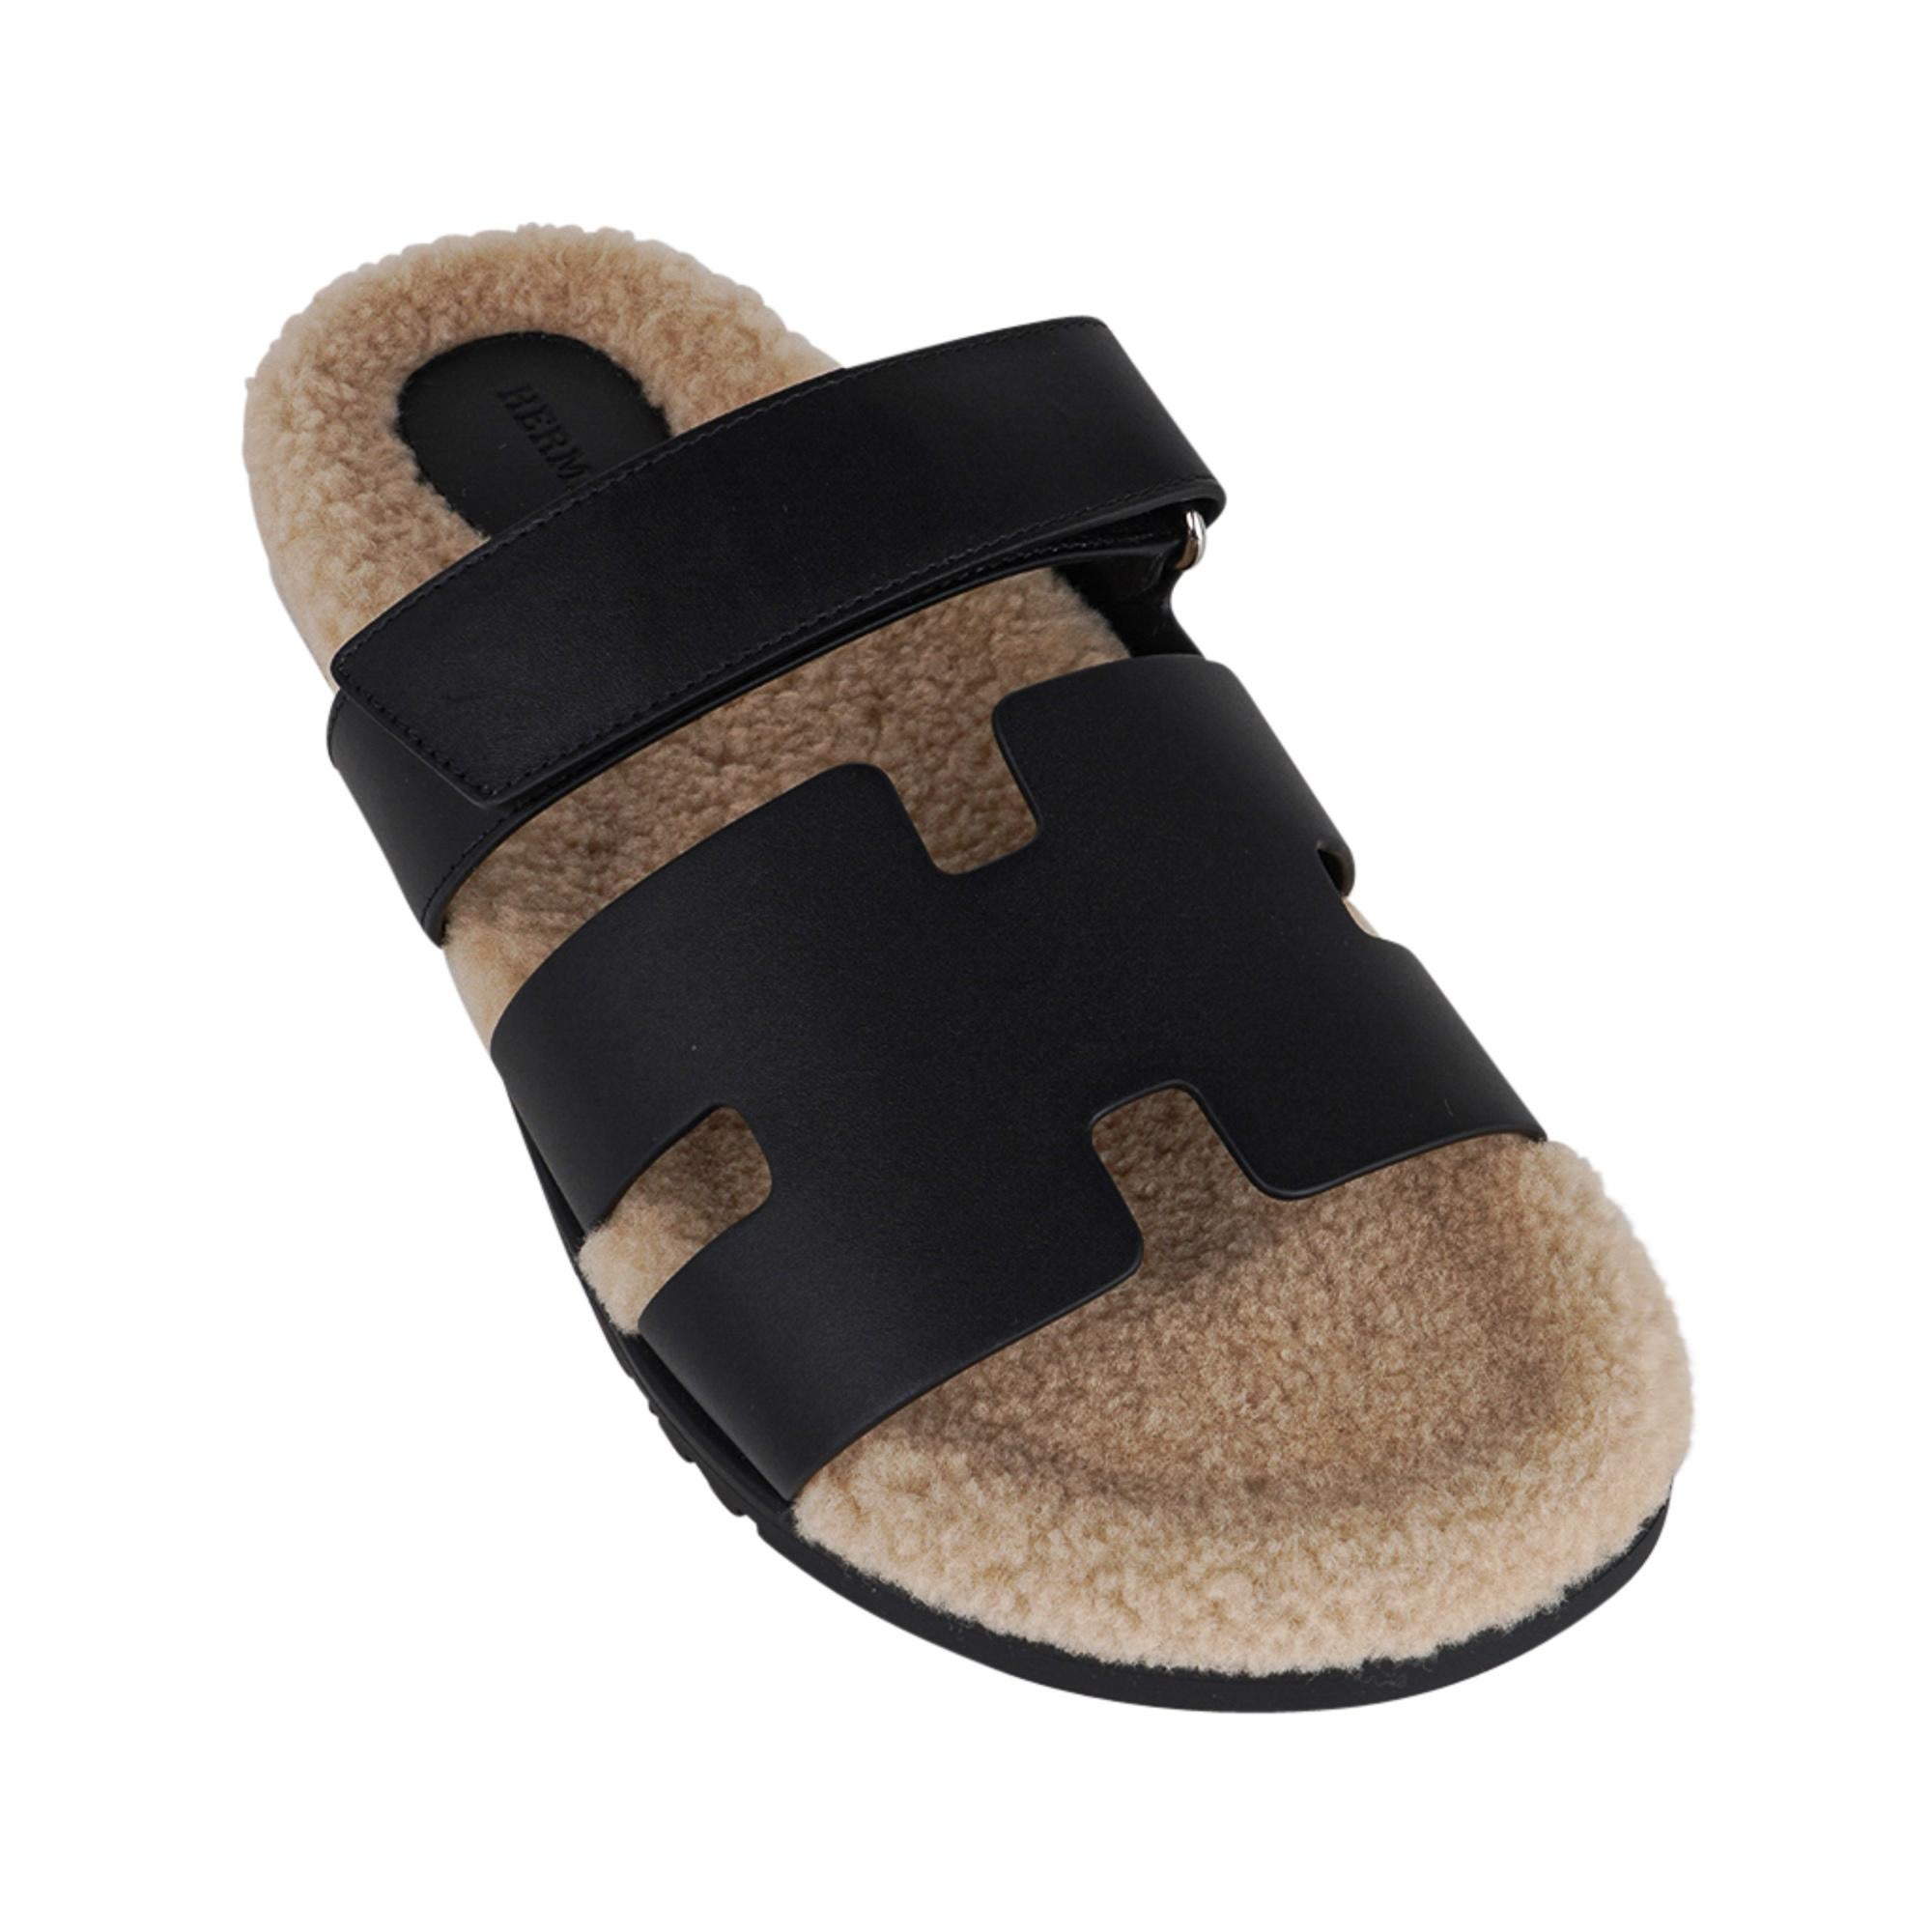 Mightychic offers an Hermes Men's Black Chypre Veau Indios Woolskin sandal.
The iconic H cutout over the top of the foot in Calfskin with ecru woolskin insole and H embossed rubber sole.
Strap across foot is adjustable with velcro closure.
Comes